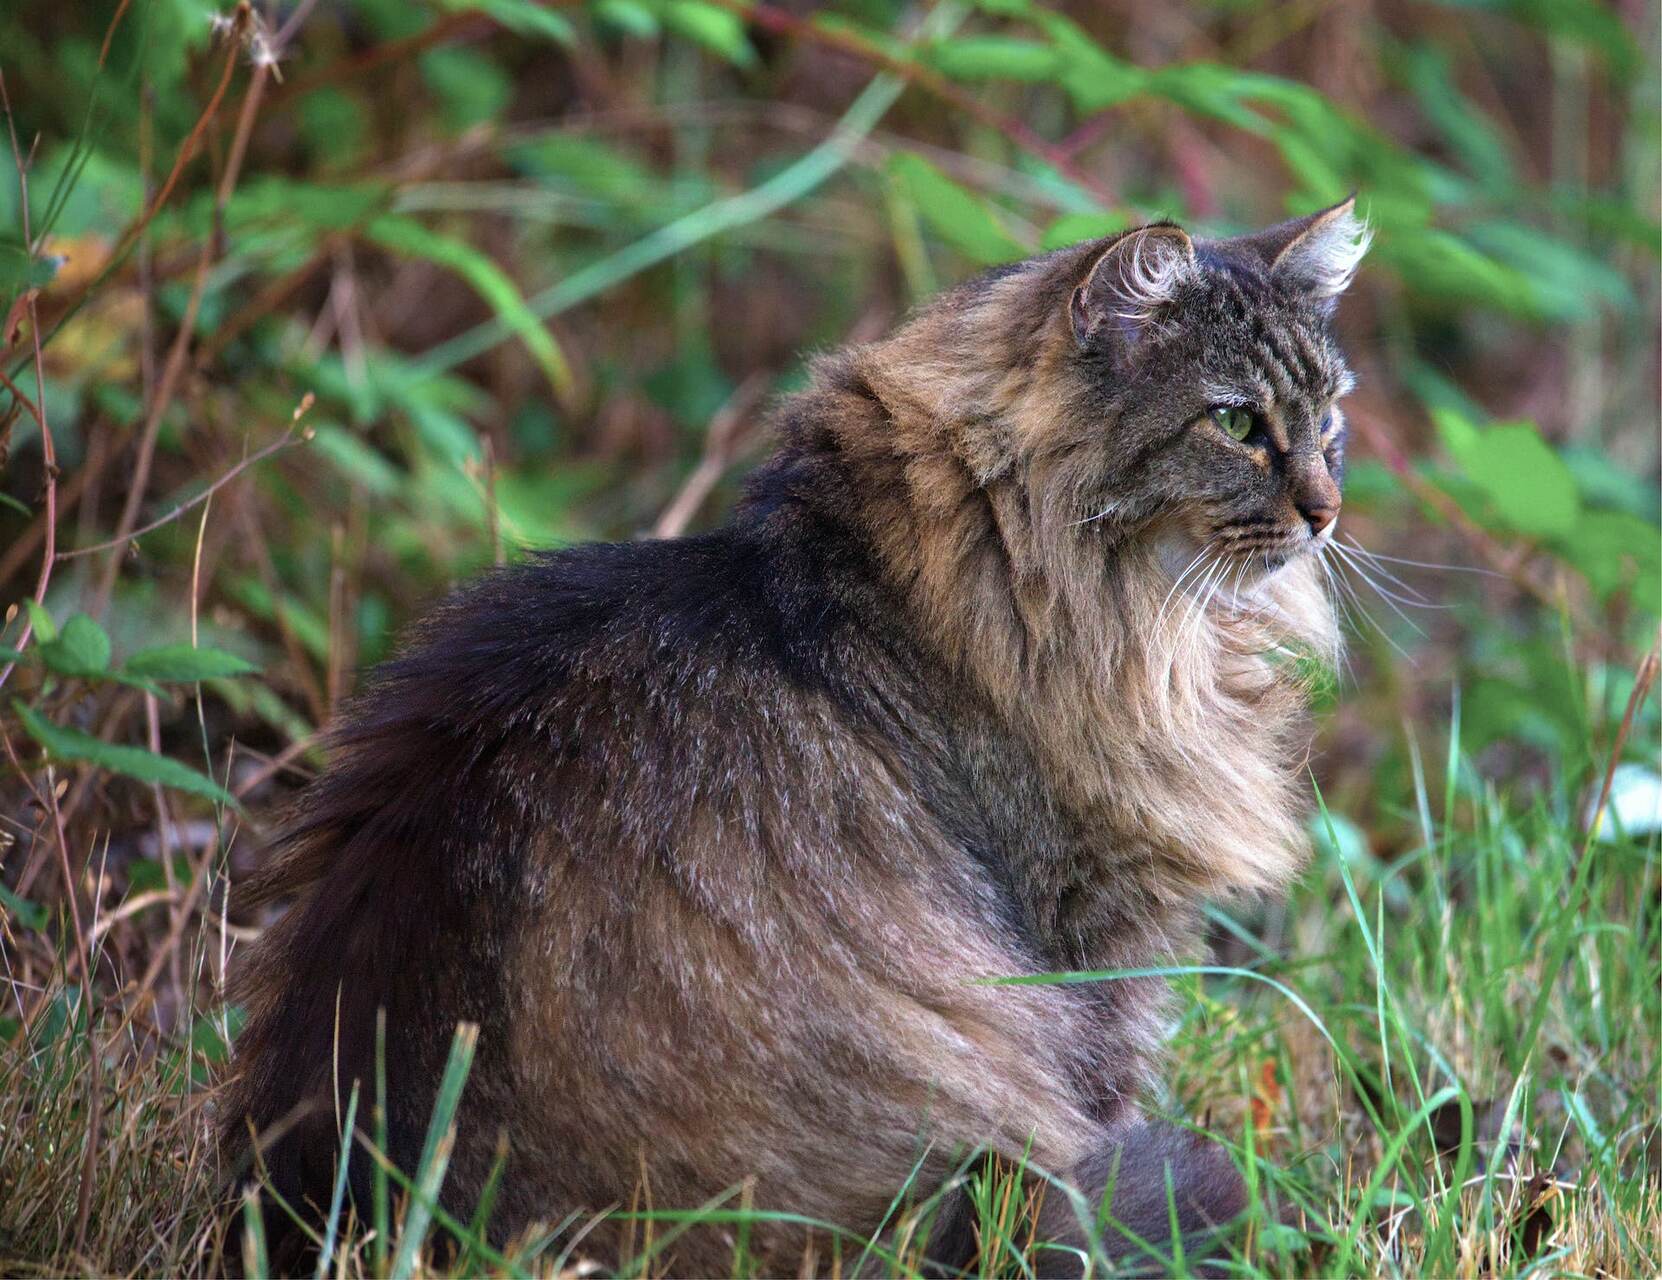 A Maine Coon sitting in a forested area